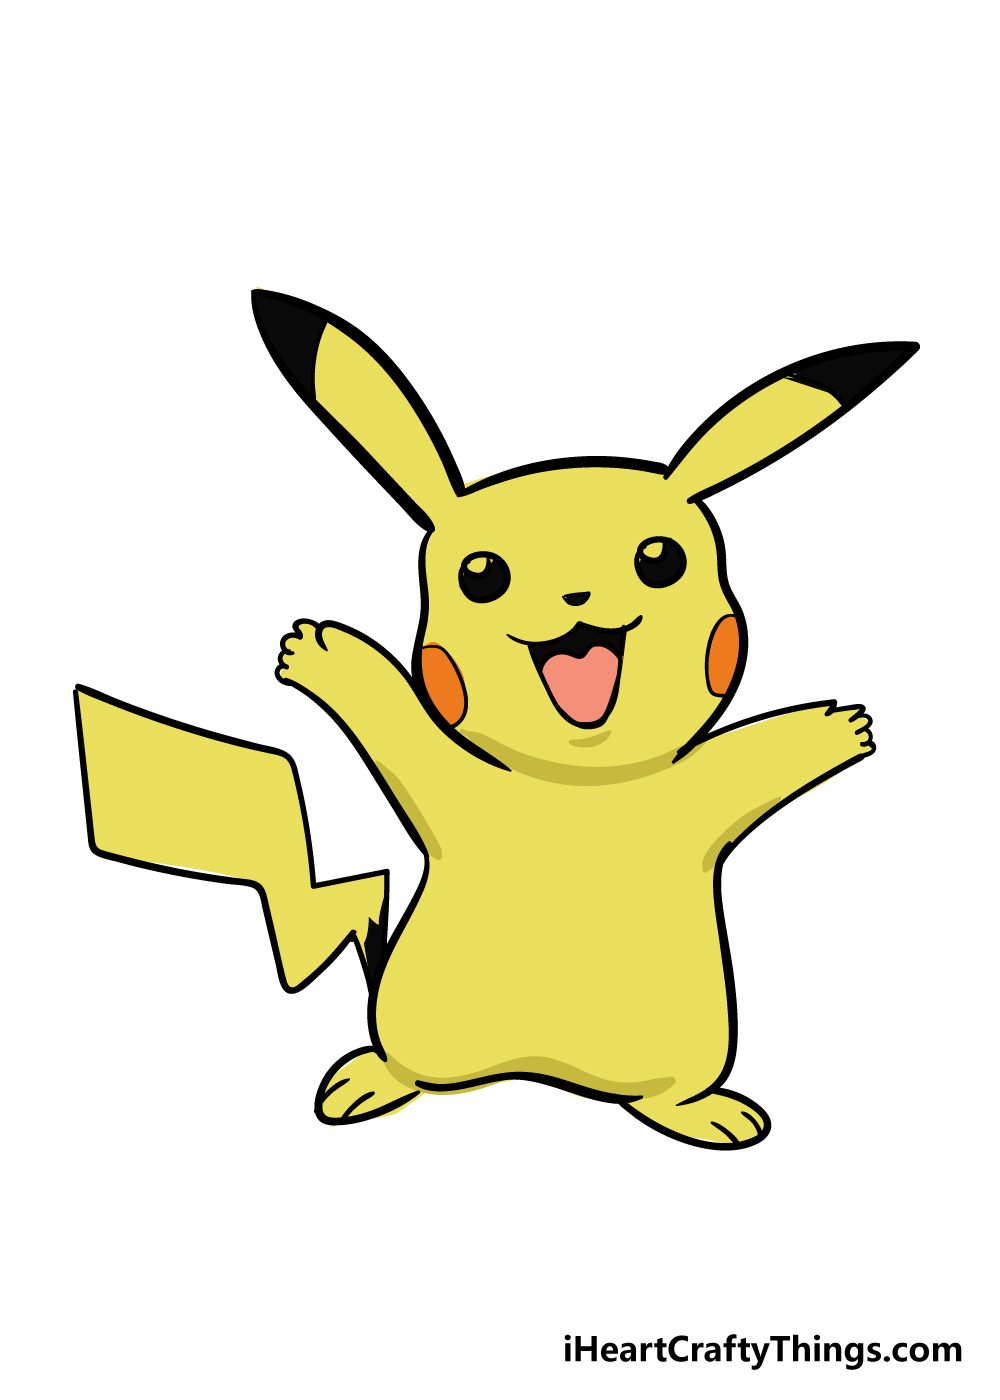 Drawing Challenge: Can You Capture Pikachu by hand?-saigonsouth.com.vn